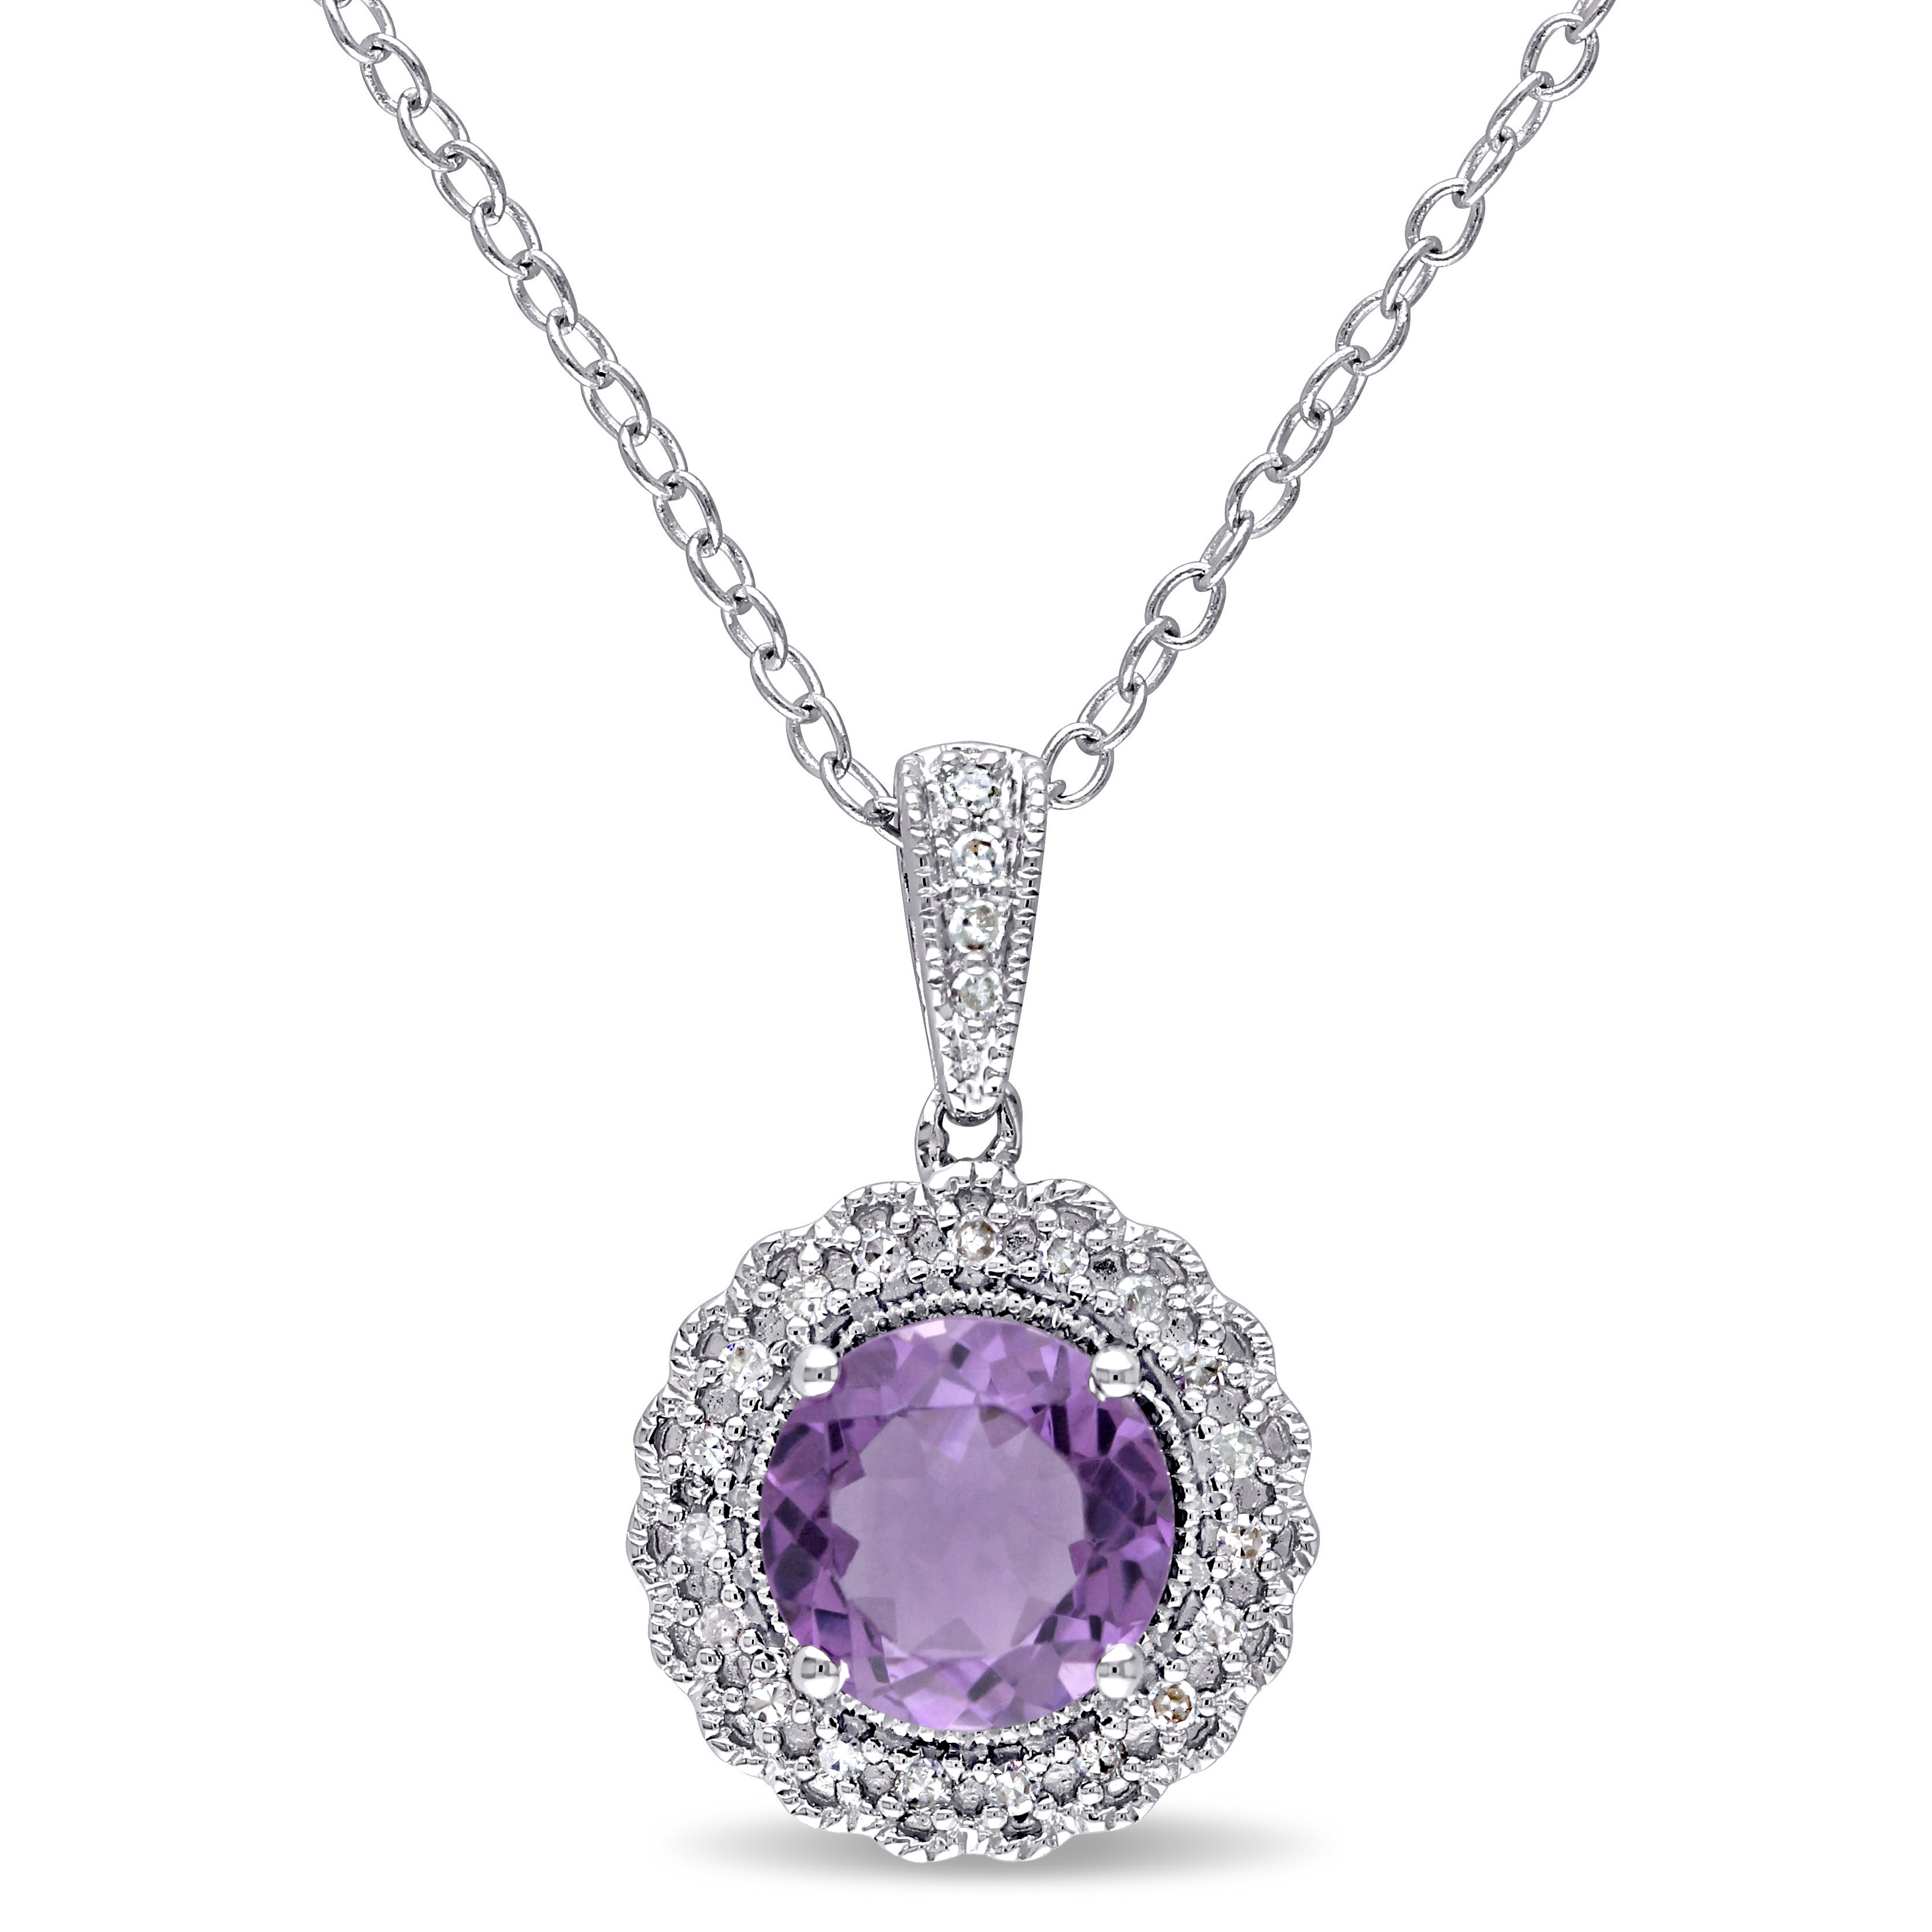 1/10 CT TW Diamond and Amethyst Halo Pendant with Chain in Sterling Silver